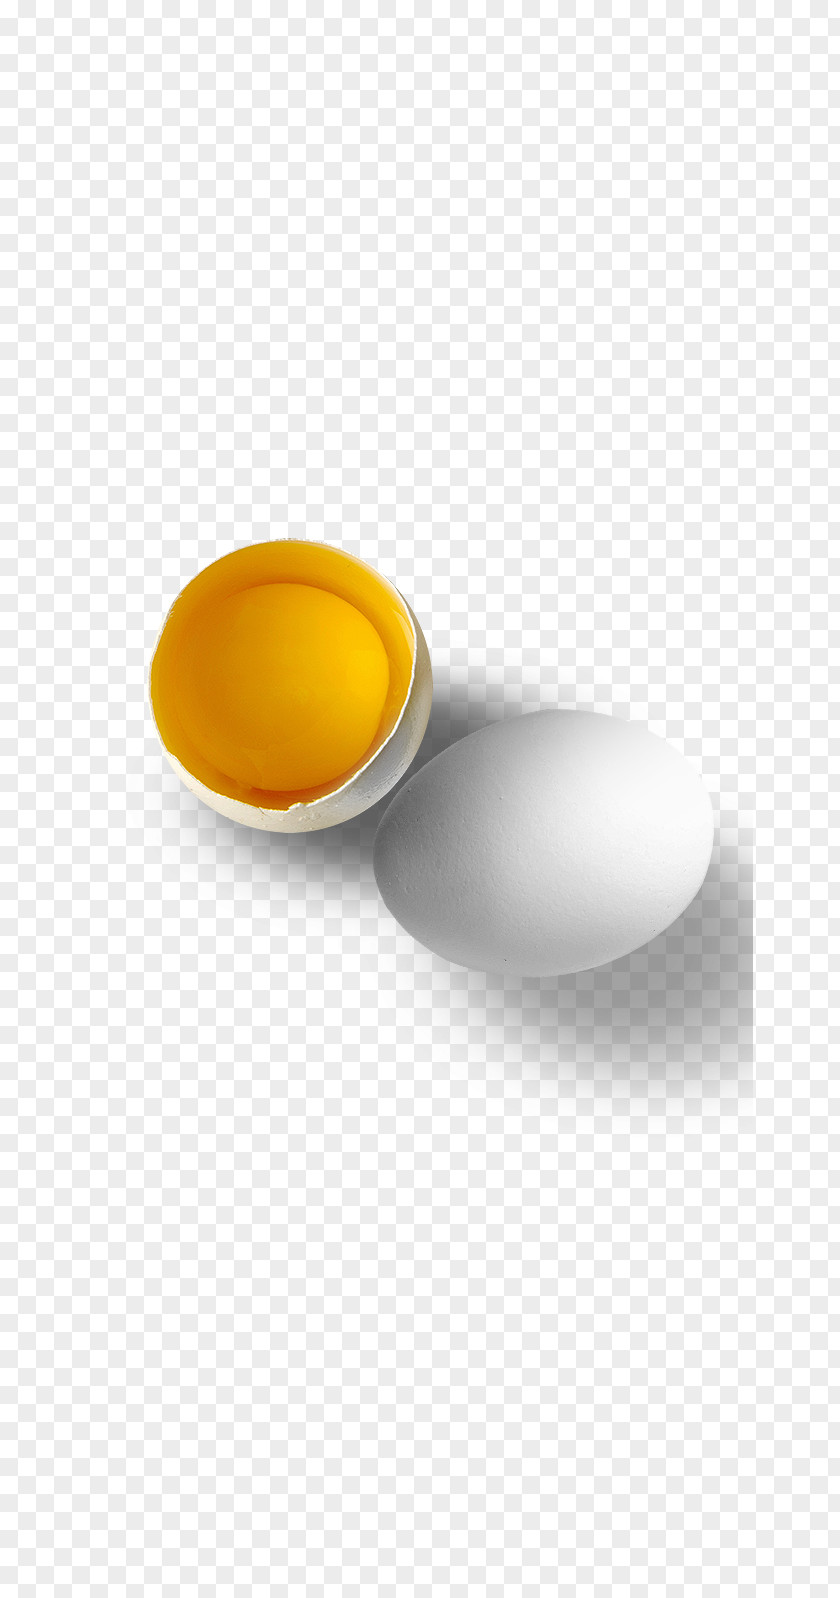 Complete And Broken Eggs Smash The Eggs! Chicken Egg PNG